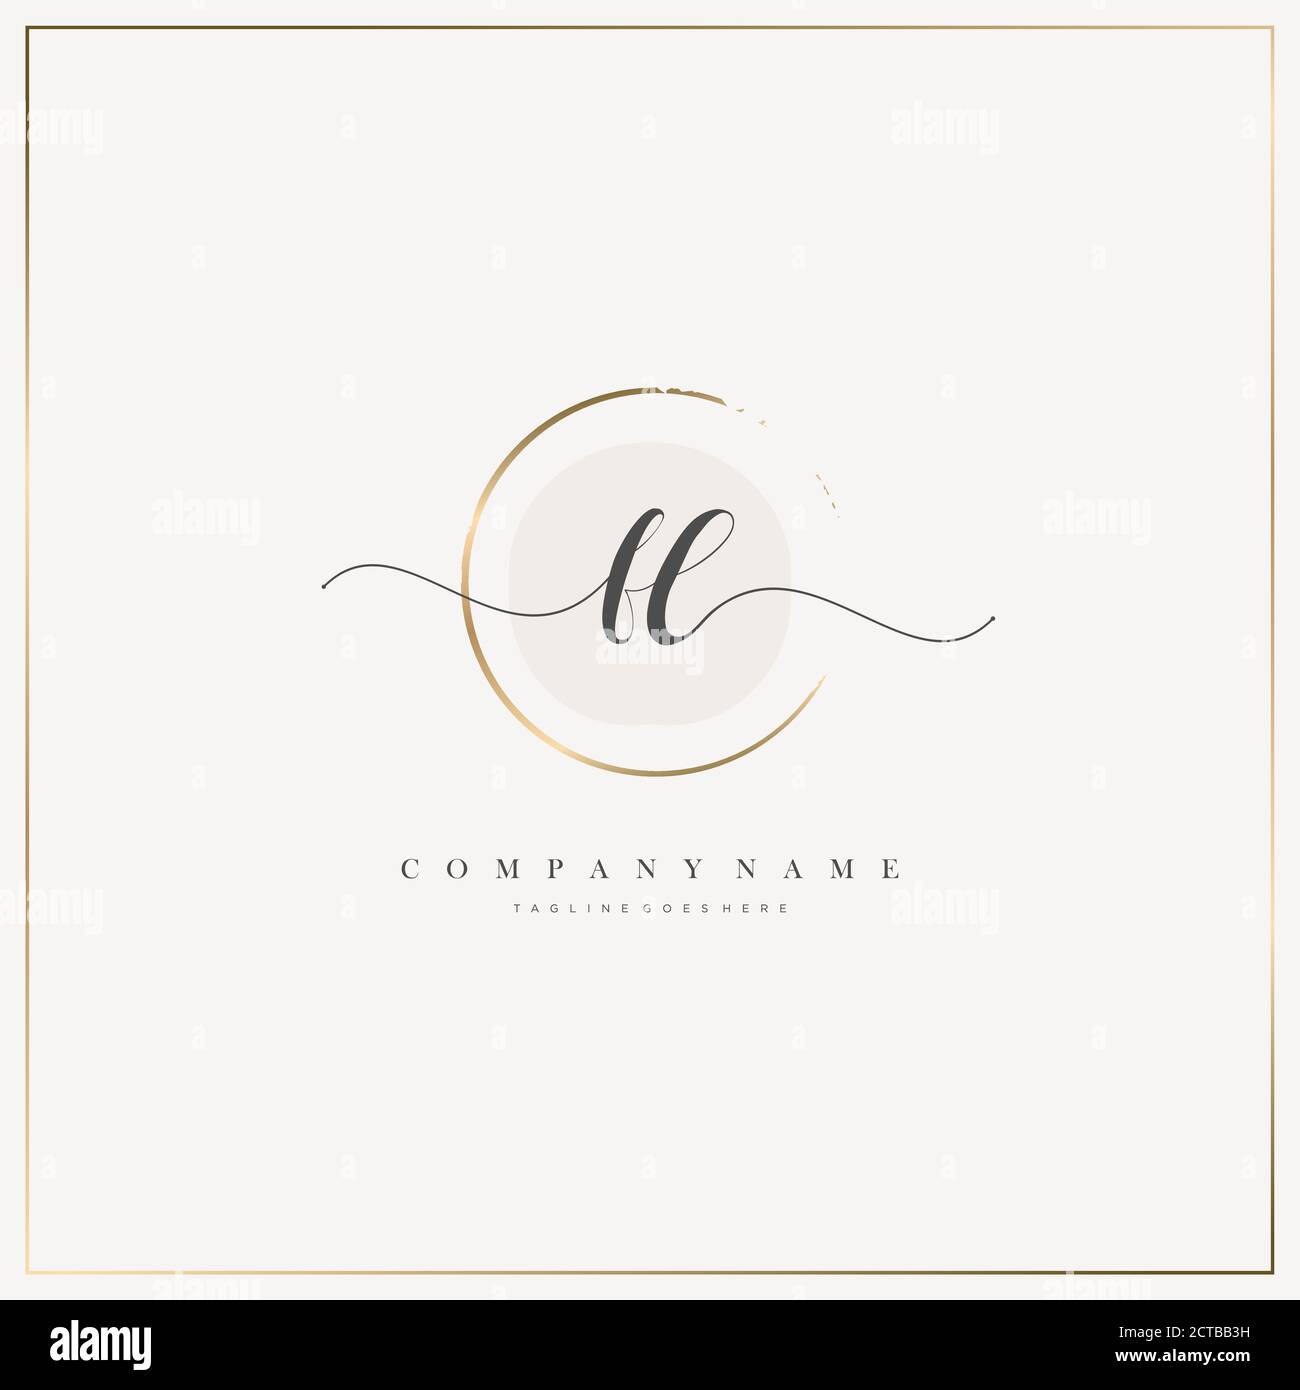 FL Initial Letter handwriting logo hand drawn template vector, logo for beauty, cosmetics, wedding, fashion and business Stock Vector